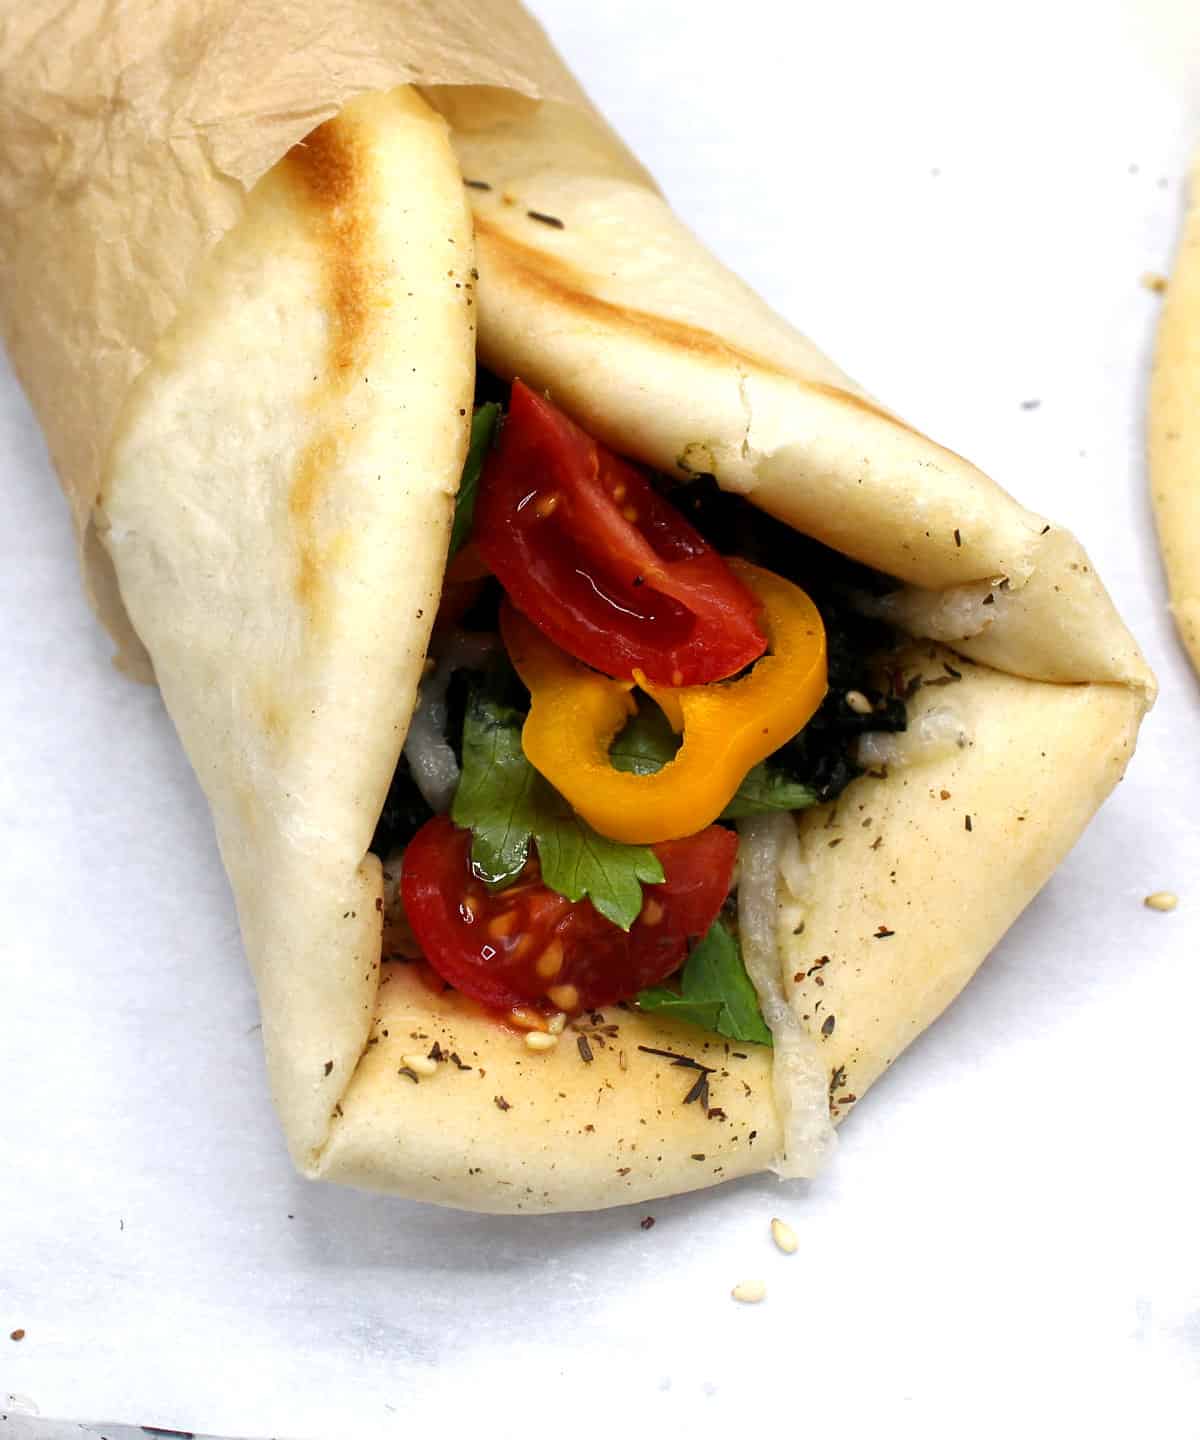 A Manakish wrap with sweet peppers, cherry tomatoes, parsley and spinach, spiced with cumin, coriander and za'atar, rolled up into a wrap and secured with brown parchment paper.